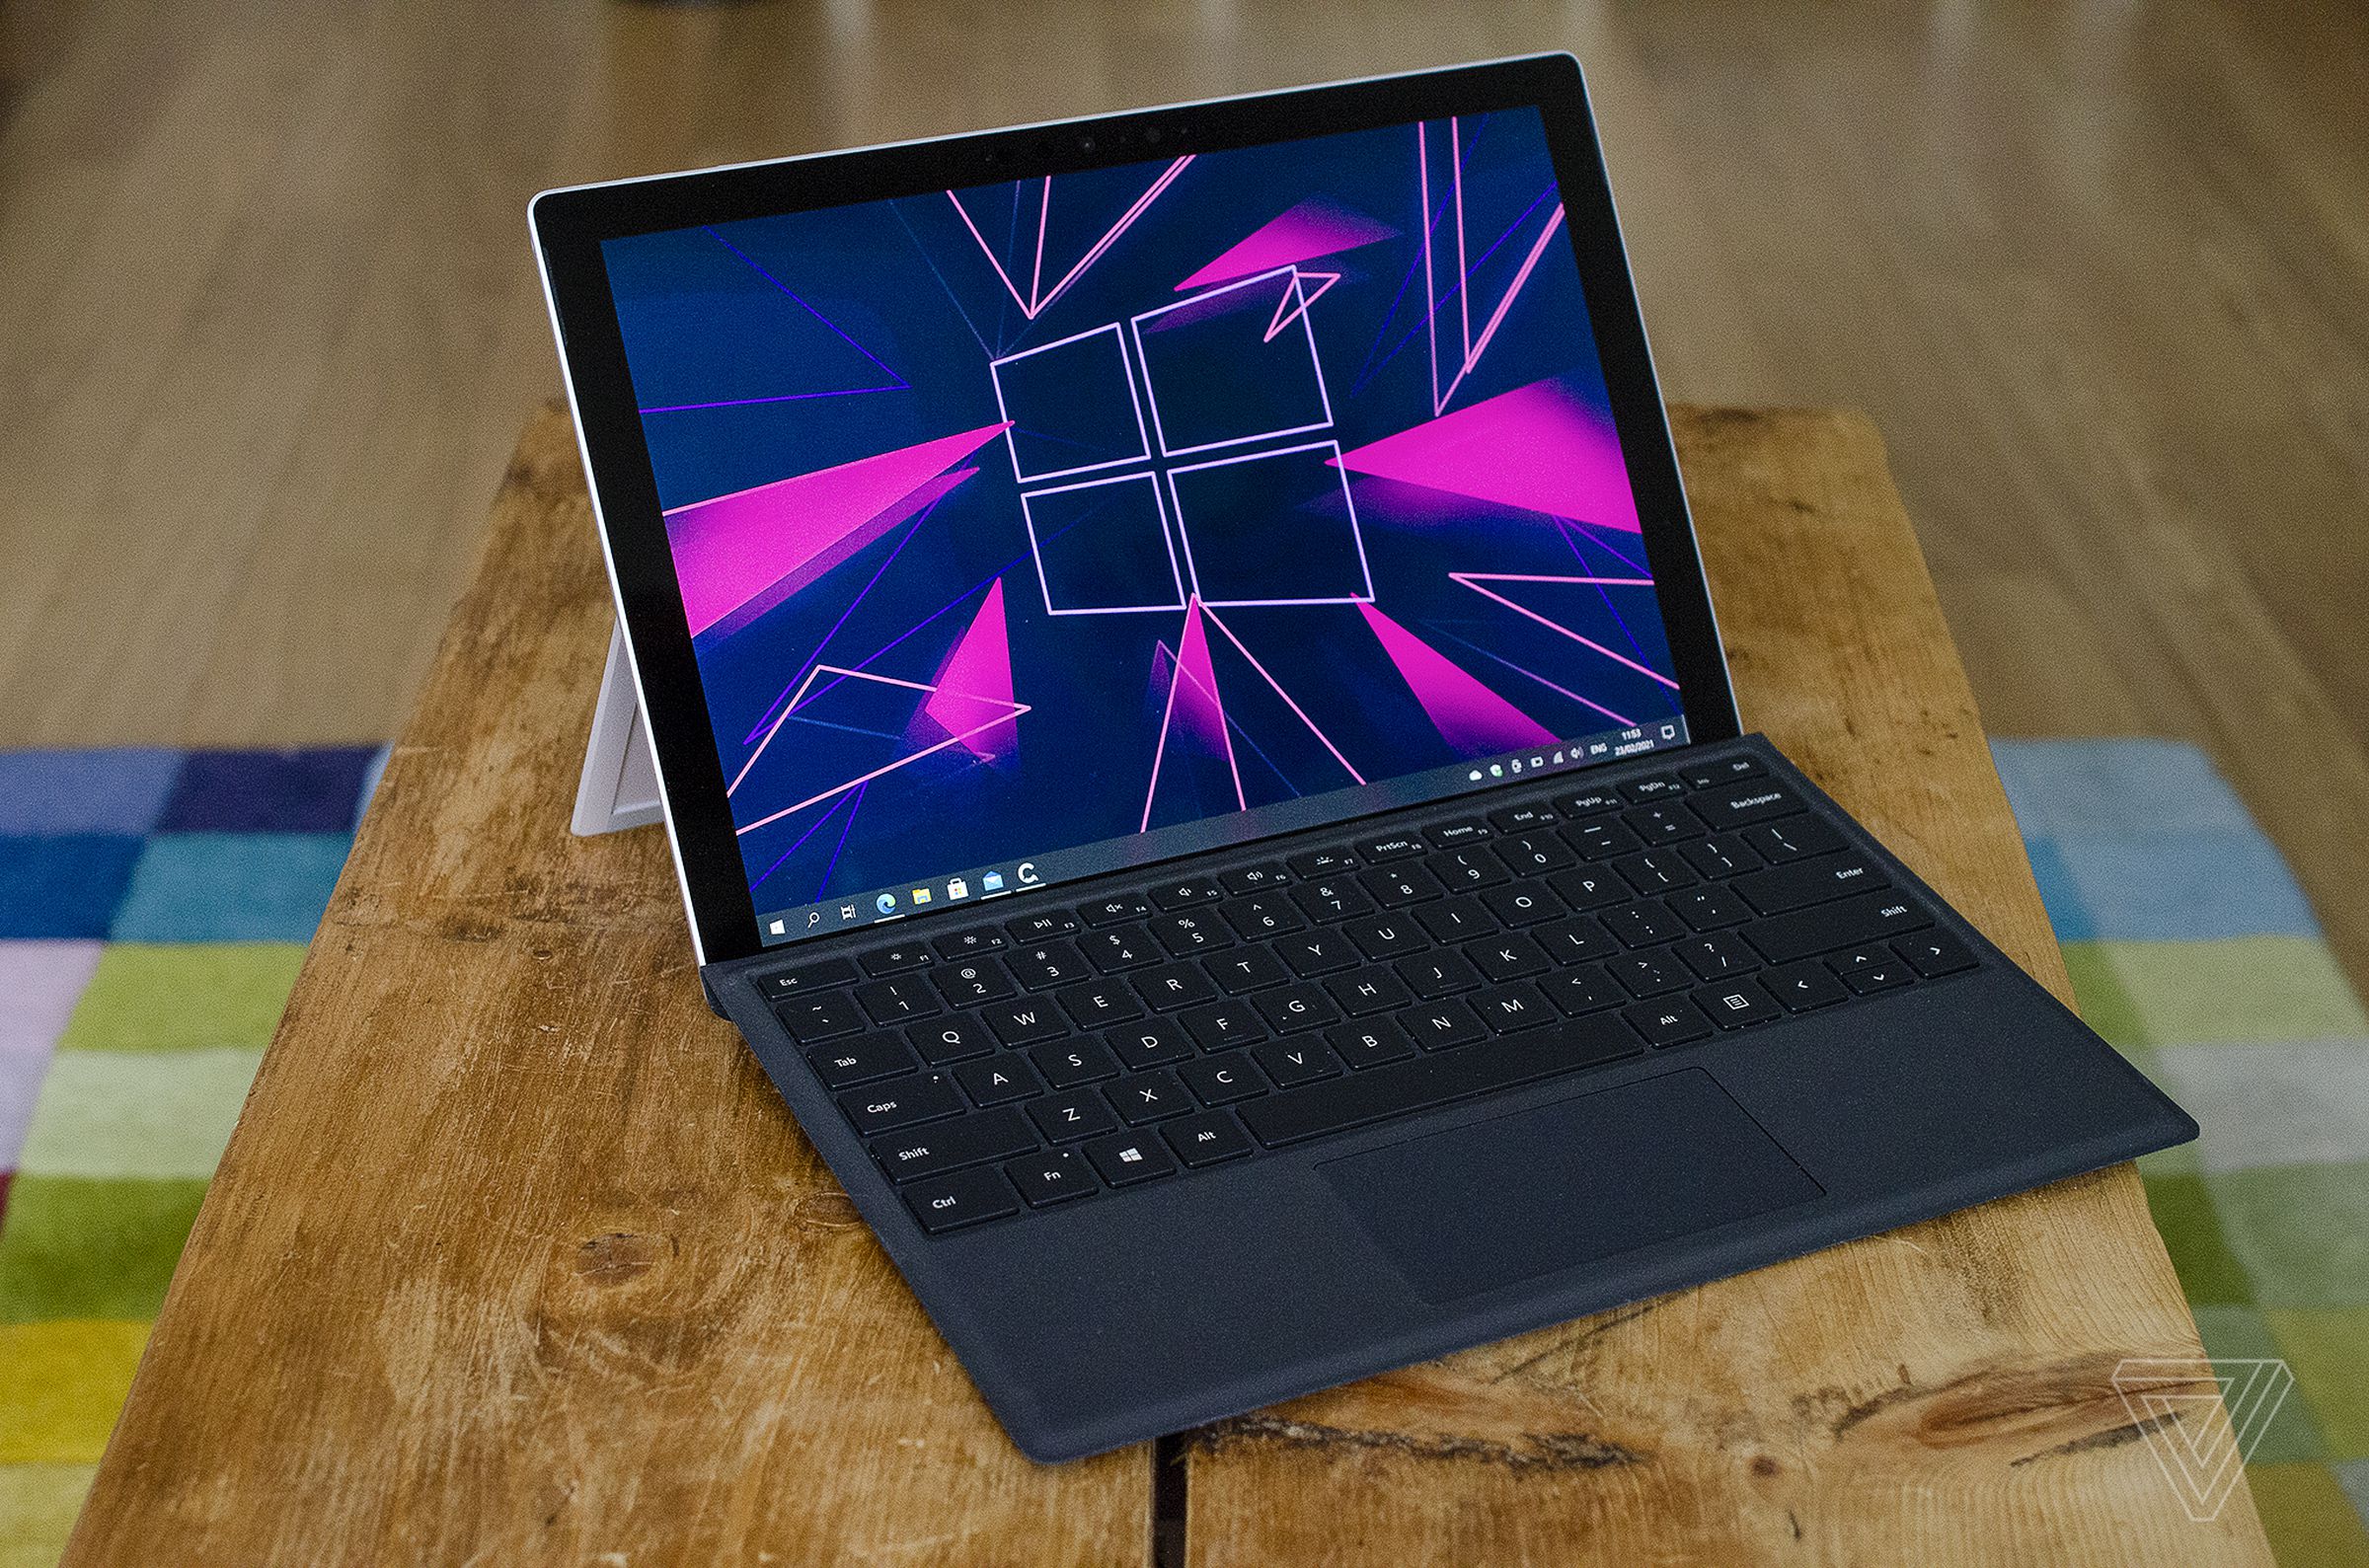 We’re expecting a new Surface Pro for Windows 11.